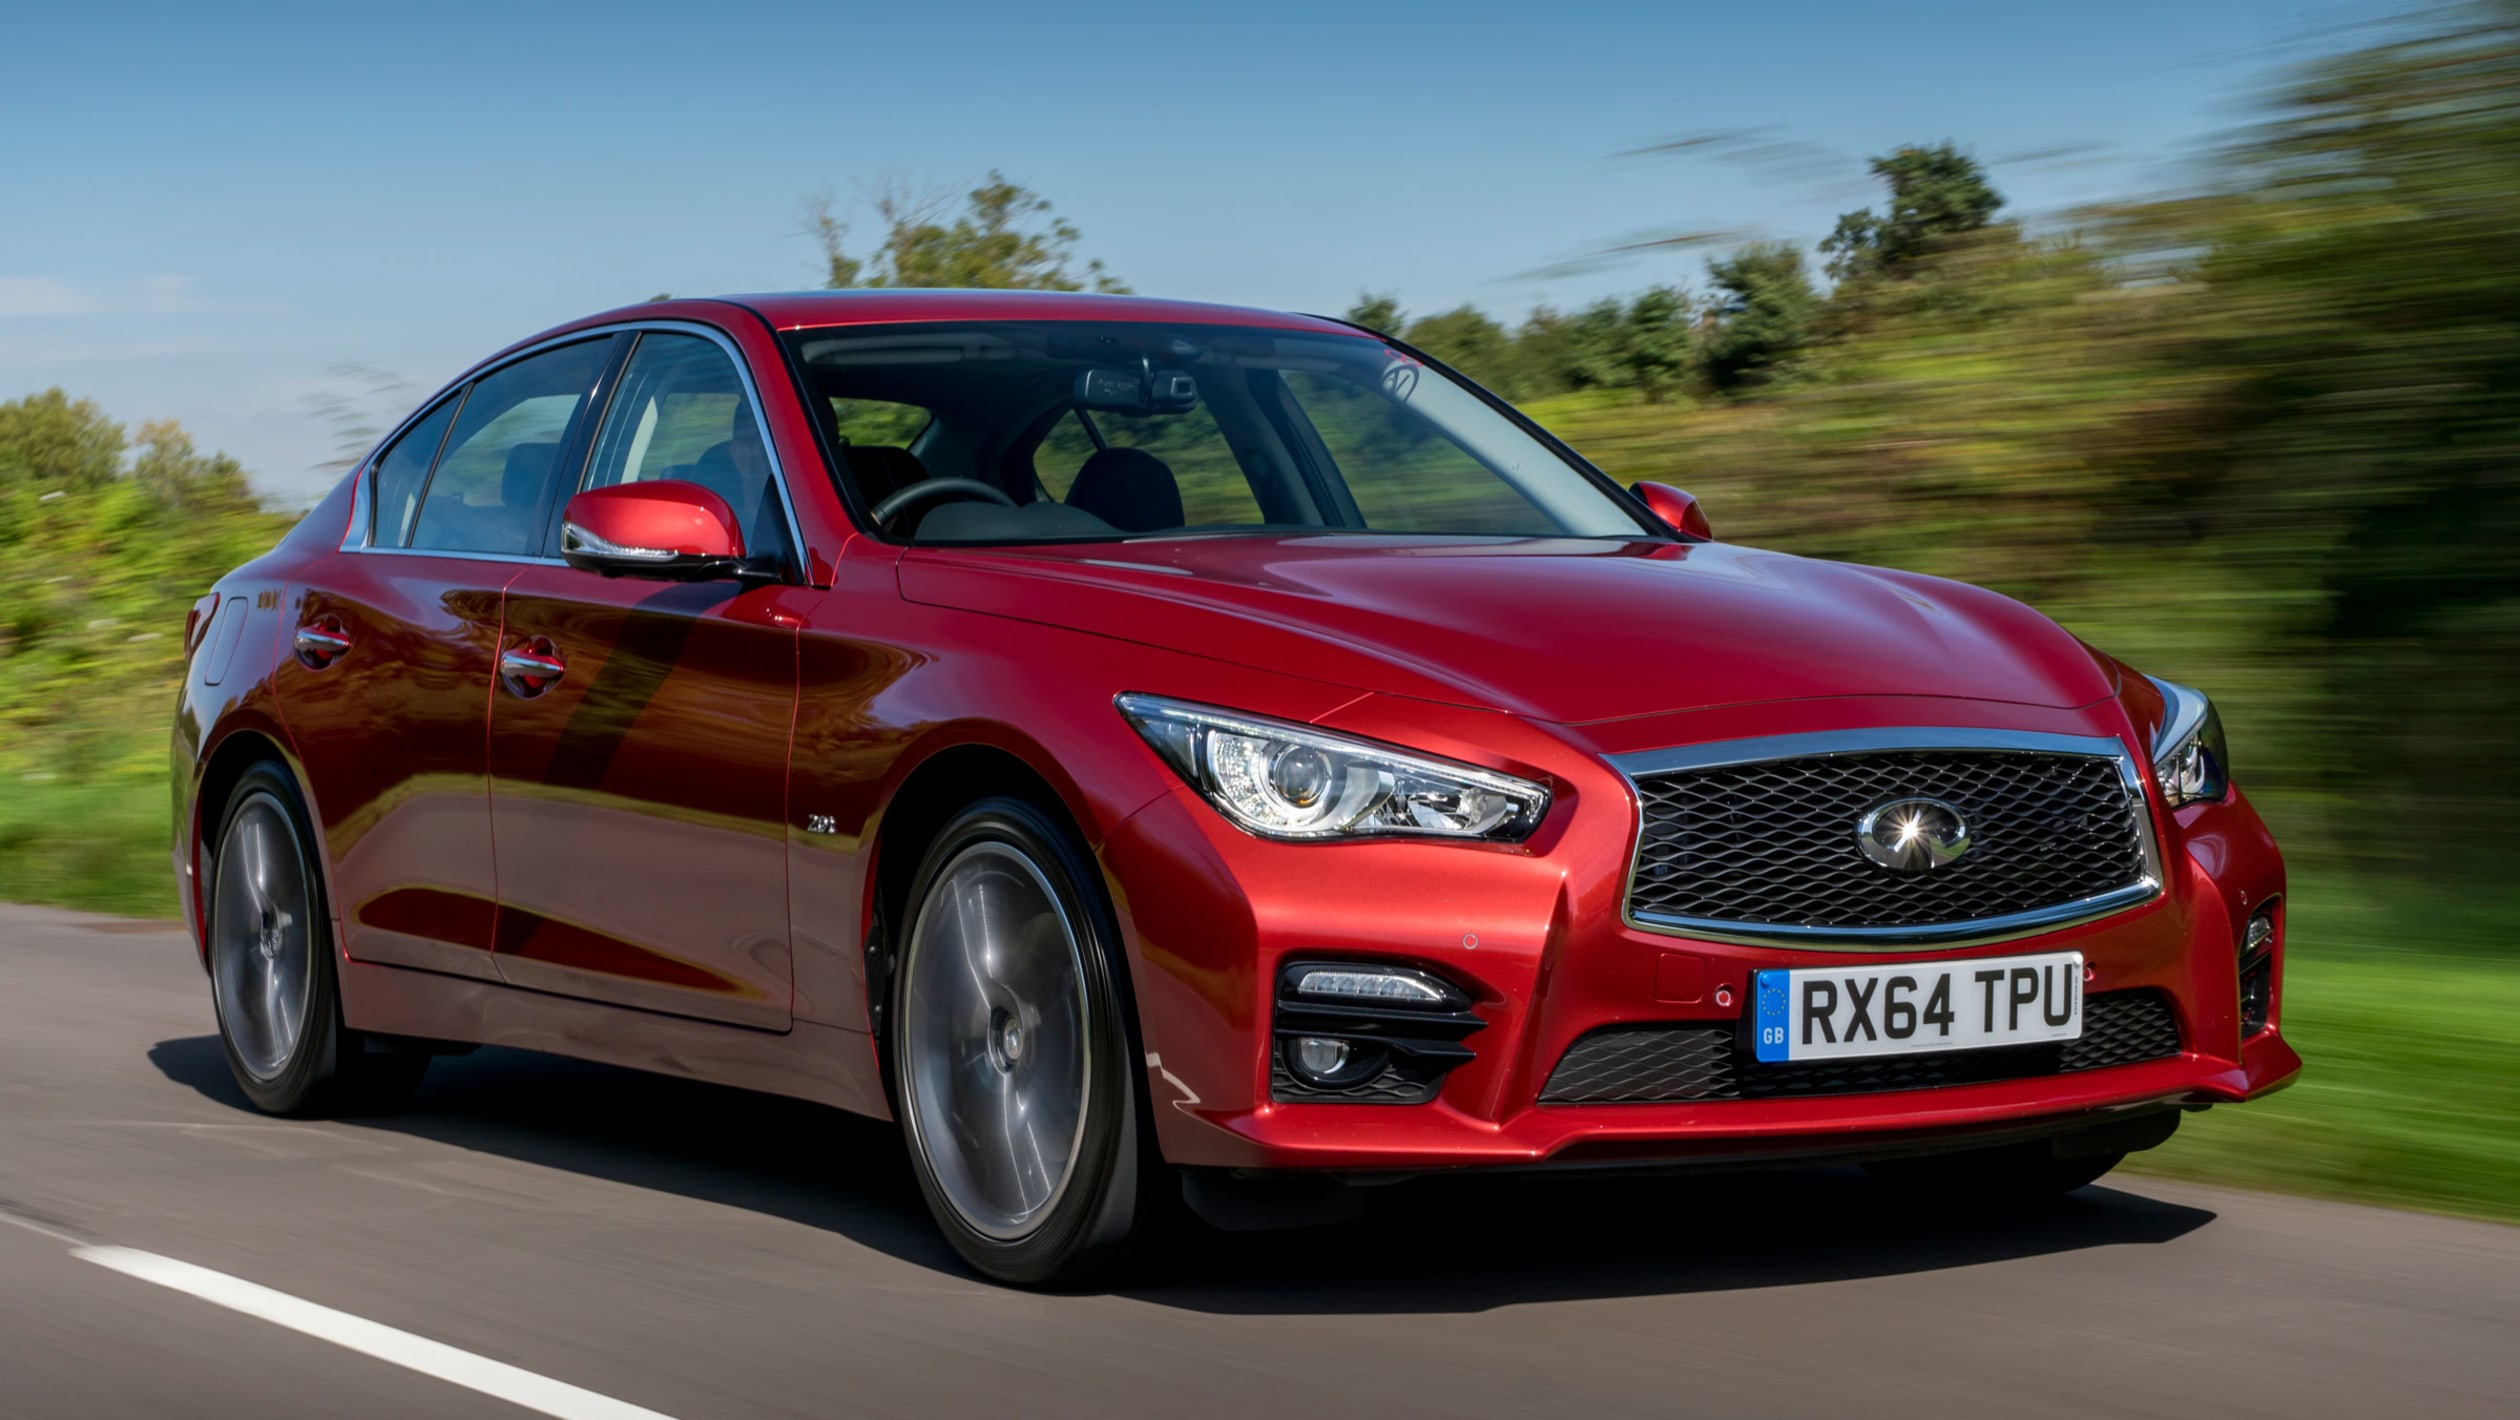 Infiniti Q50 2.0T review - pictures | Auto Express